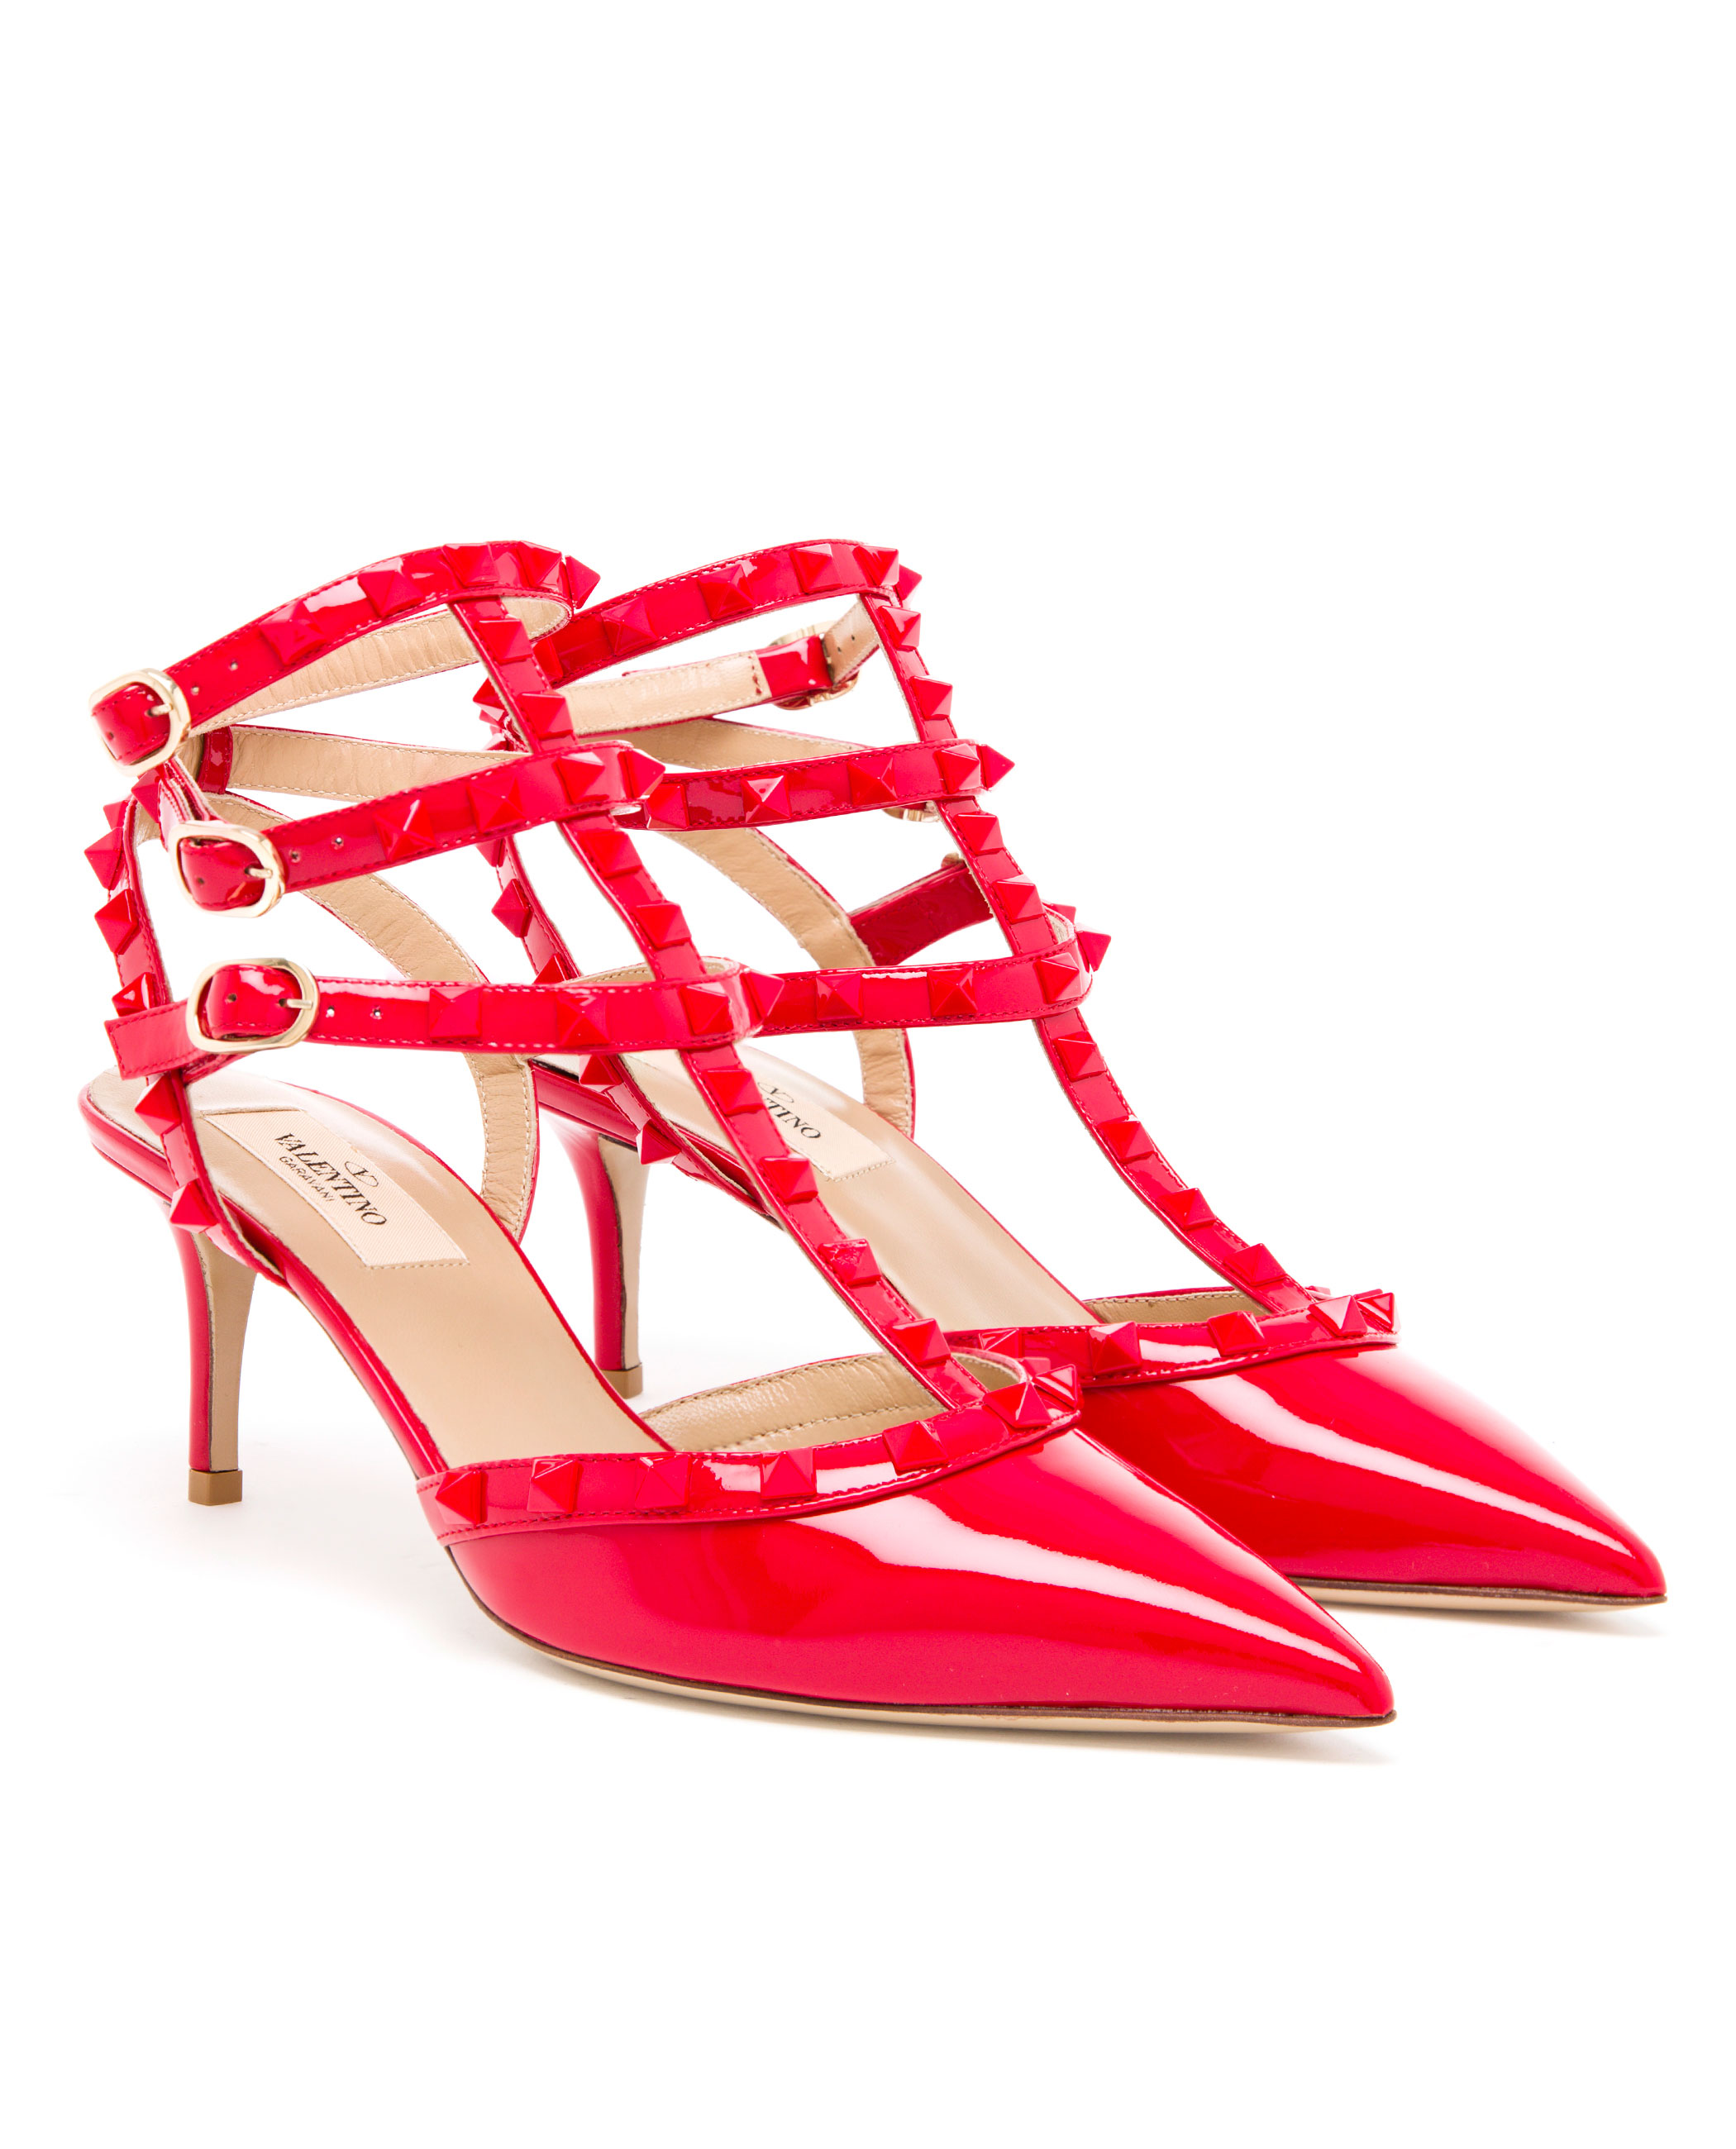 Valentino Studded Patent Leather Kitten Heels in Red | Lyst